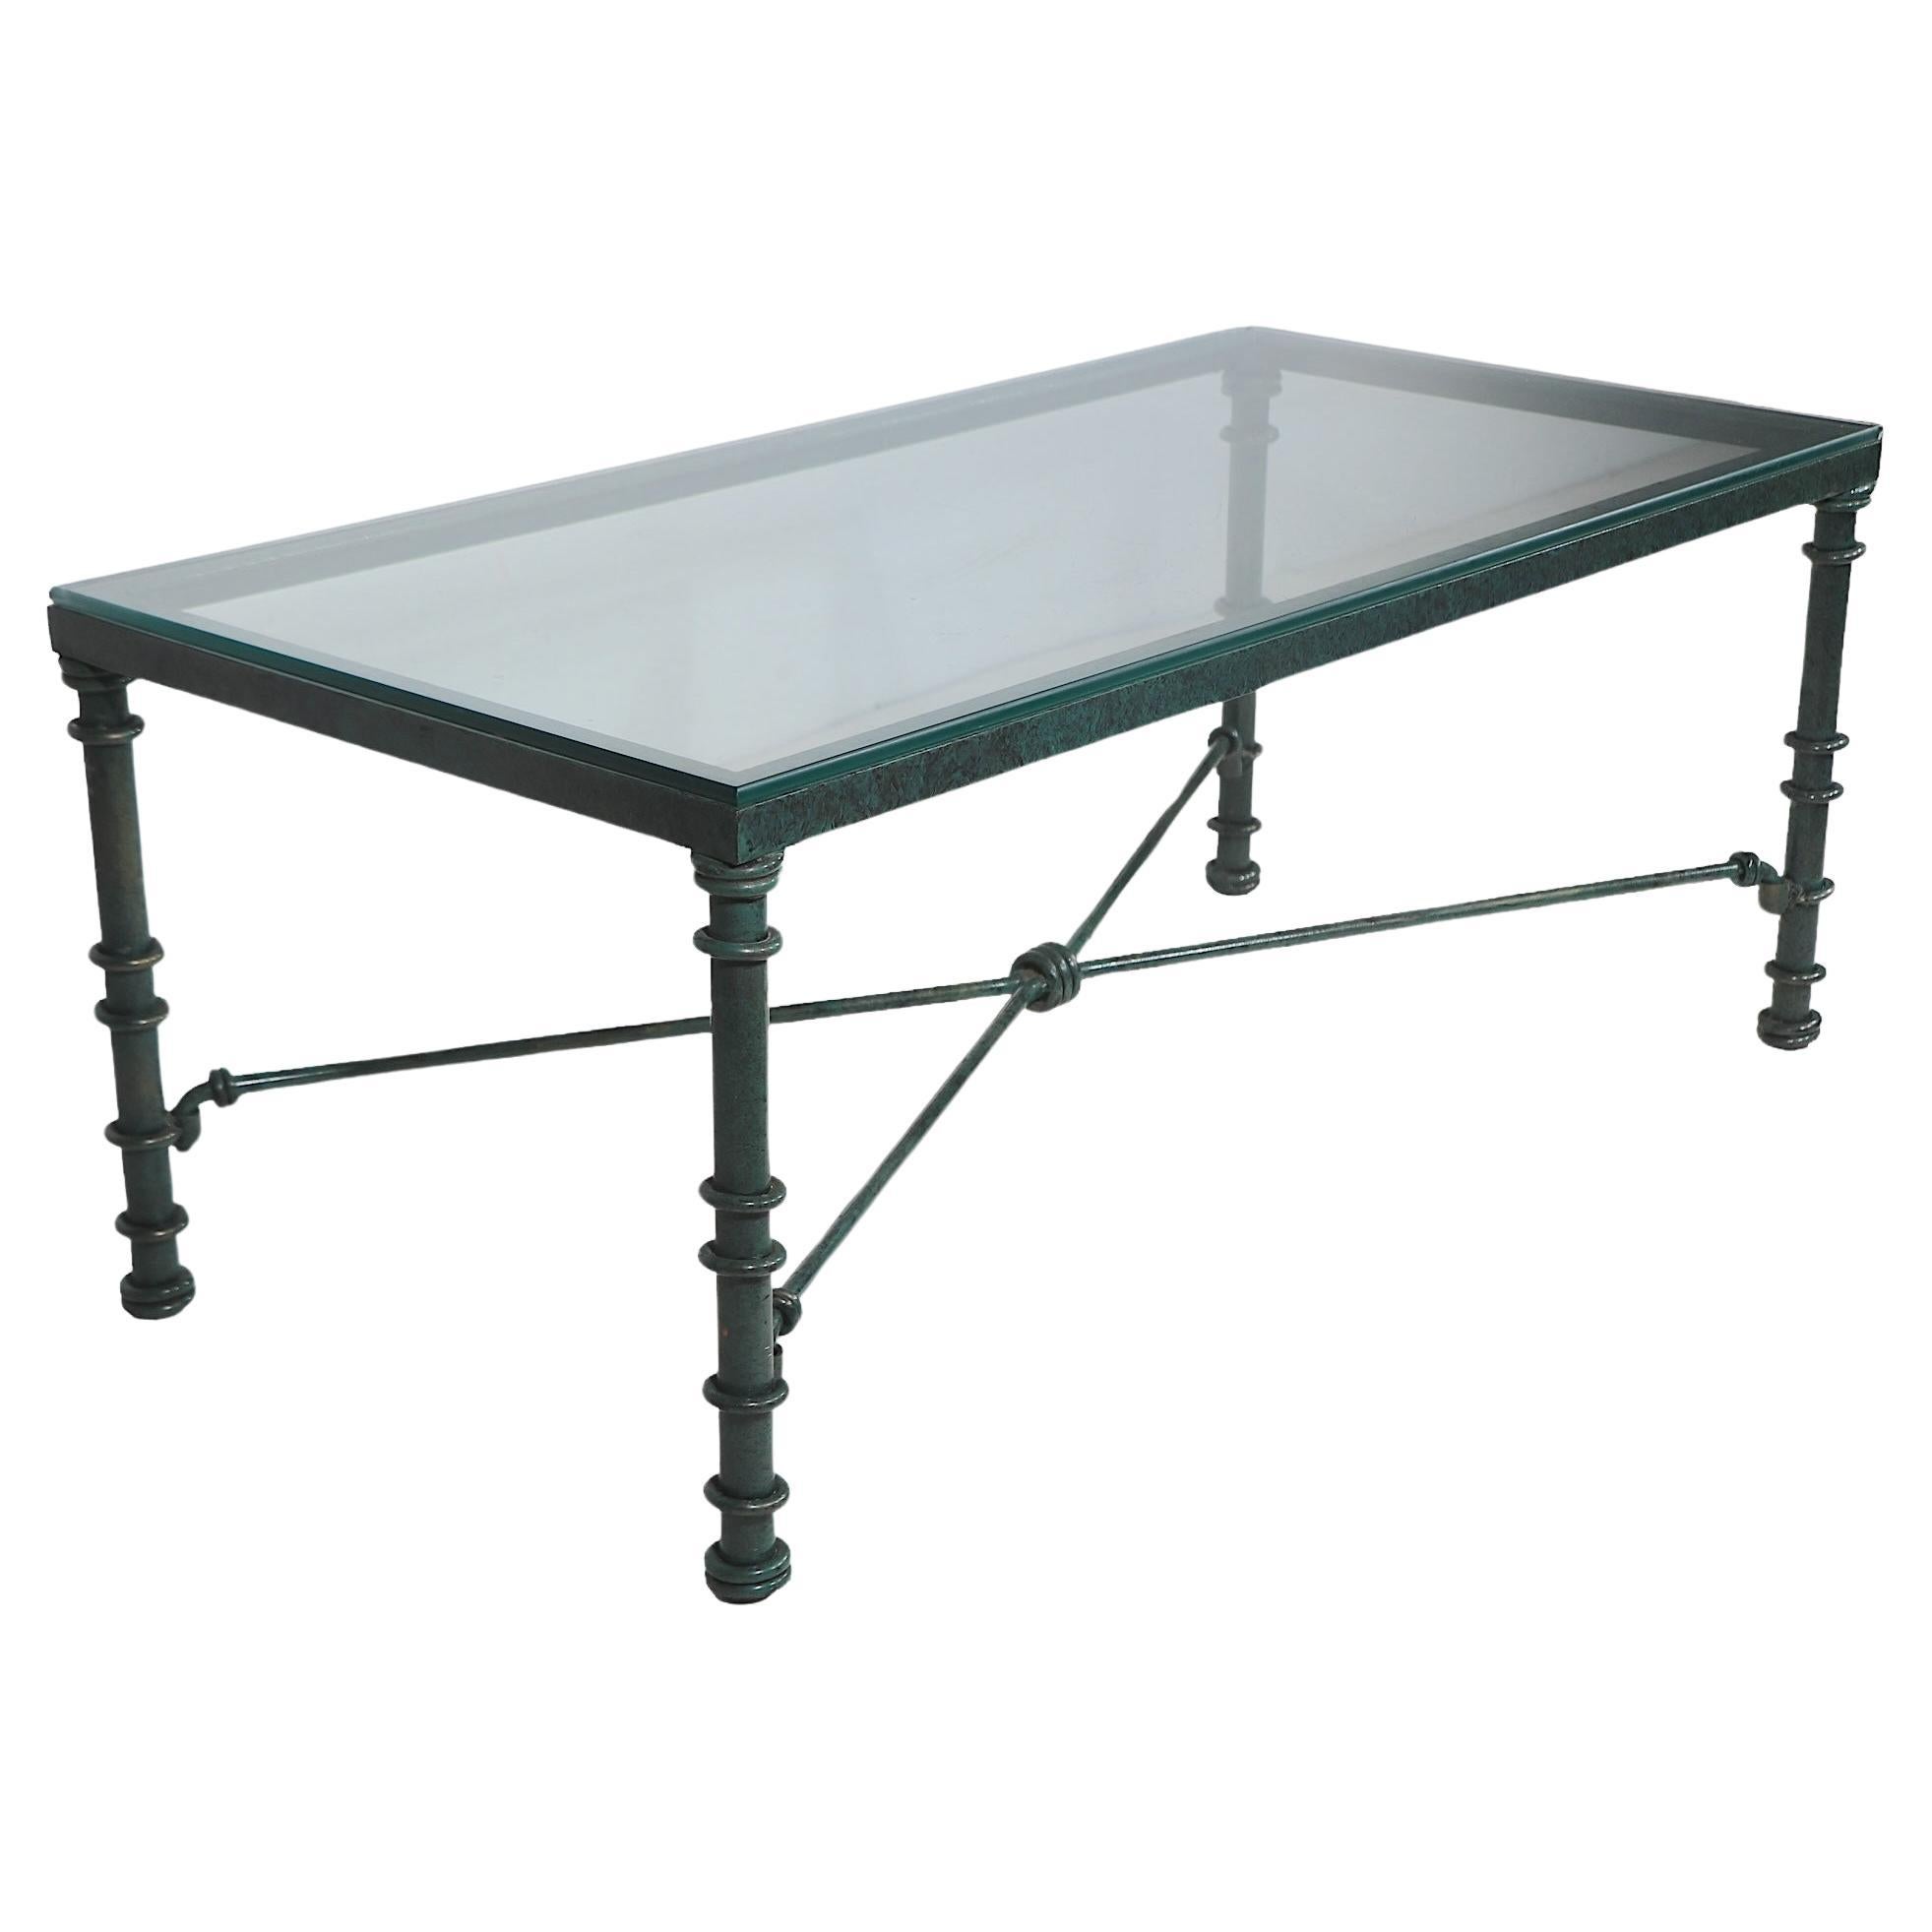 Brutalist Faux Verdigris Finish Glass Top Coffee Table c. 1970/1980's For Sale